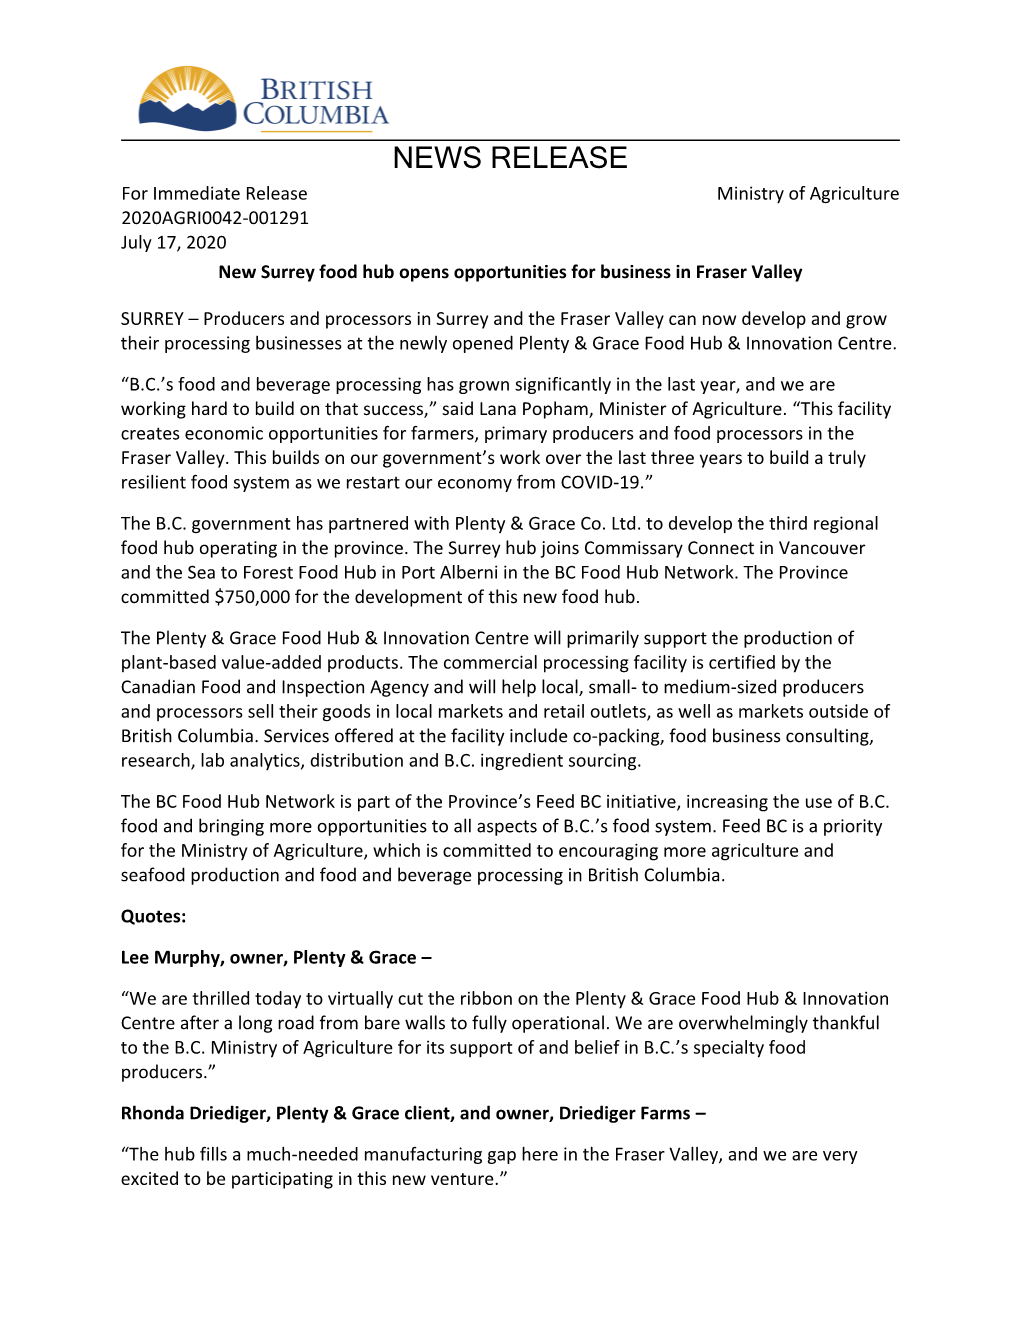 NEWS RELEASE for Immediate Release Ministry of Agriculture 2020AGRI0042-001291 July 17, 2020 New Surrey Food Hub Opens Opportunities for Business in Fraser Valley